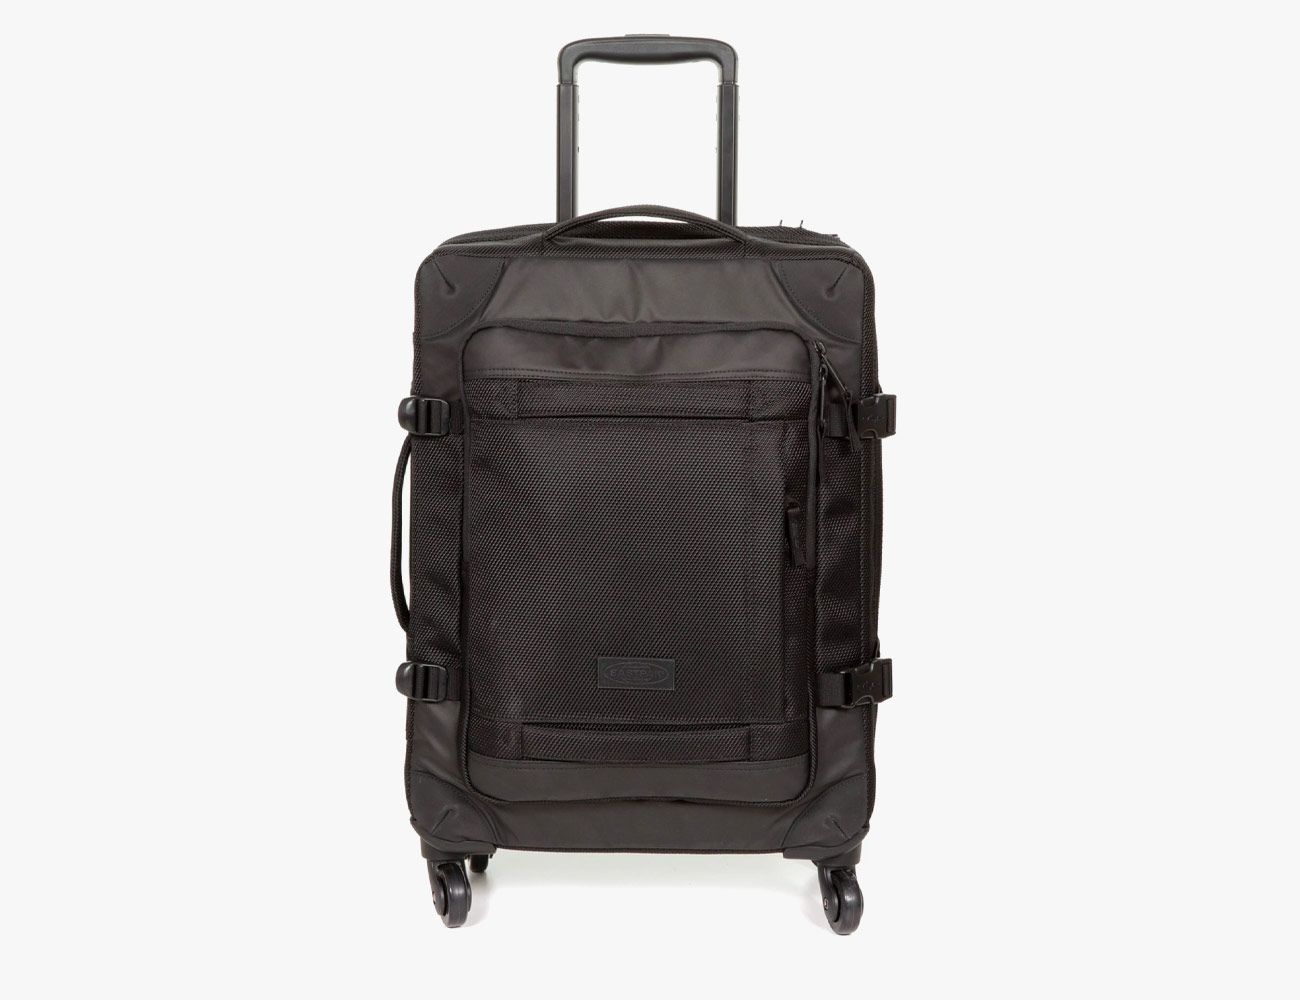 The Best Carry-On Suitcases for All Your Holiday Travels